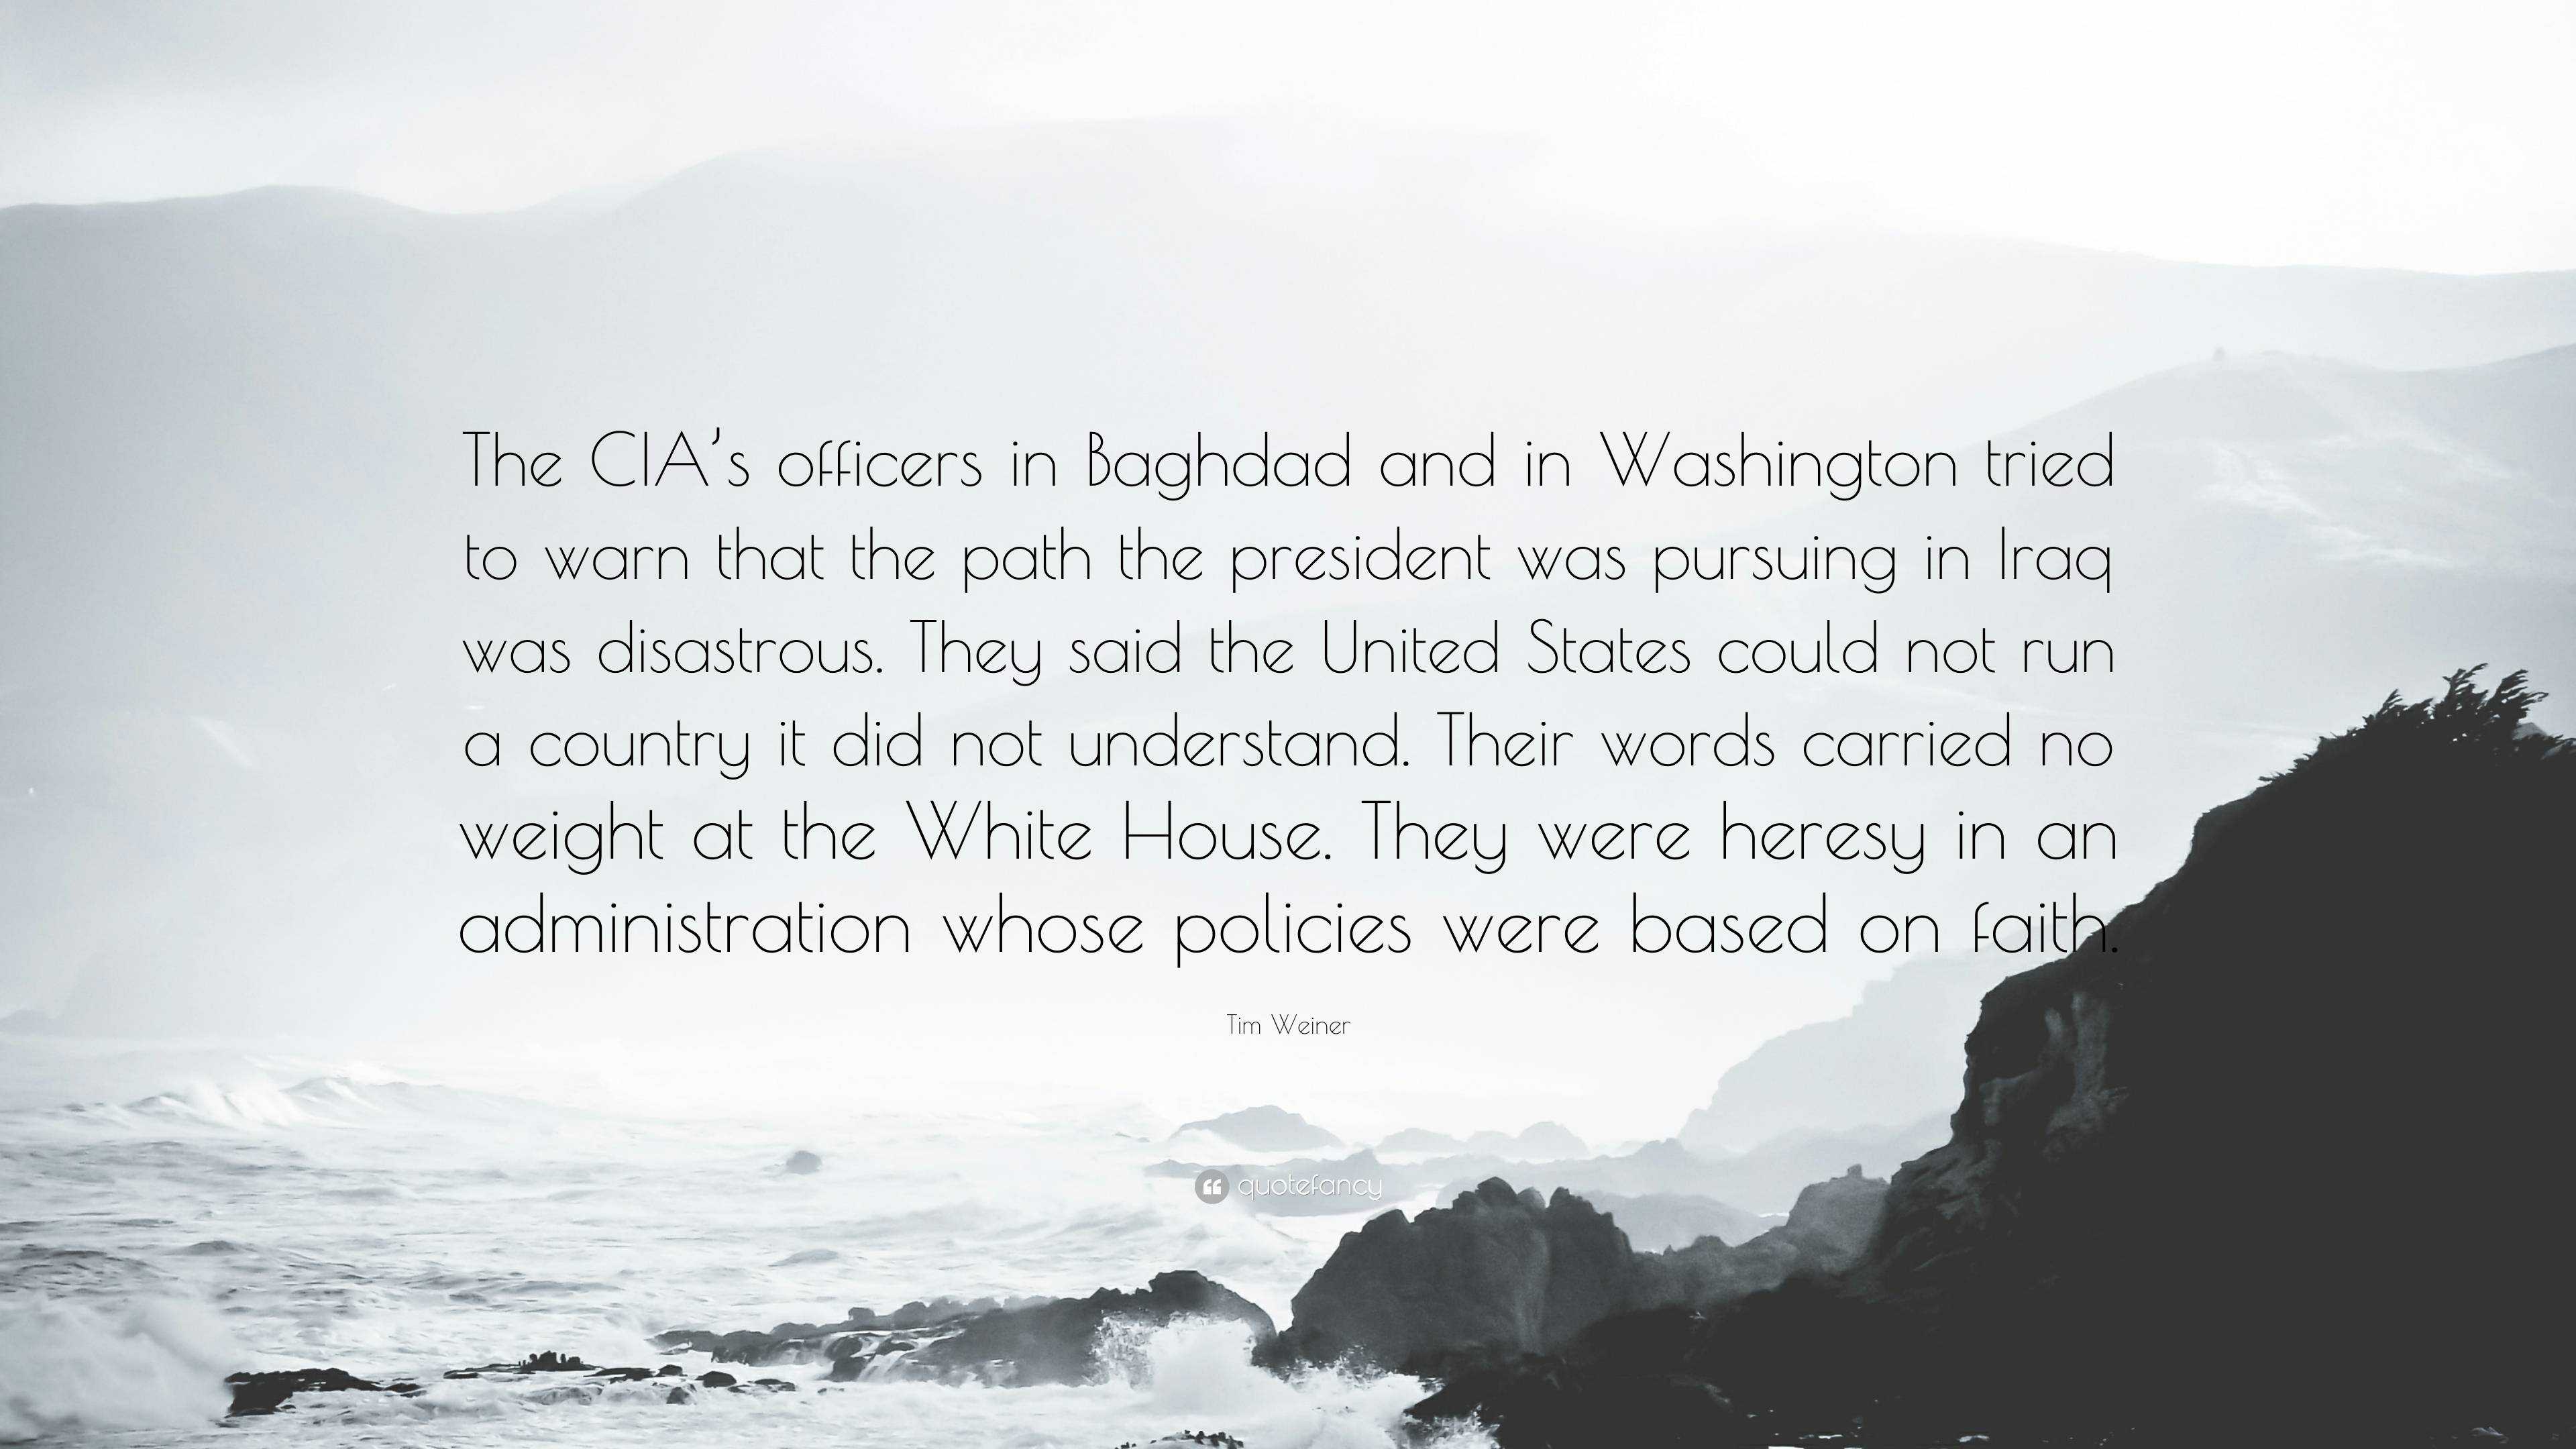 Tim Weiner Quote: “The CIA's officers in Baghdad and in Washington tried to that the path the president pursuing in Iraq disas...”